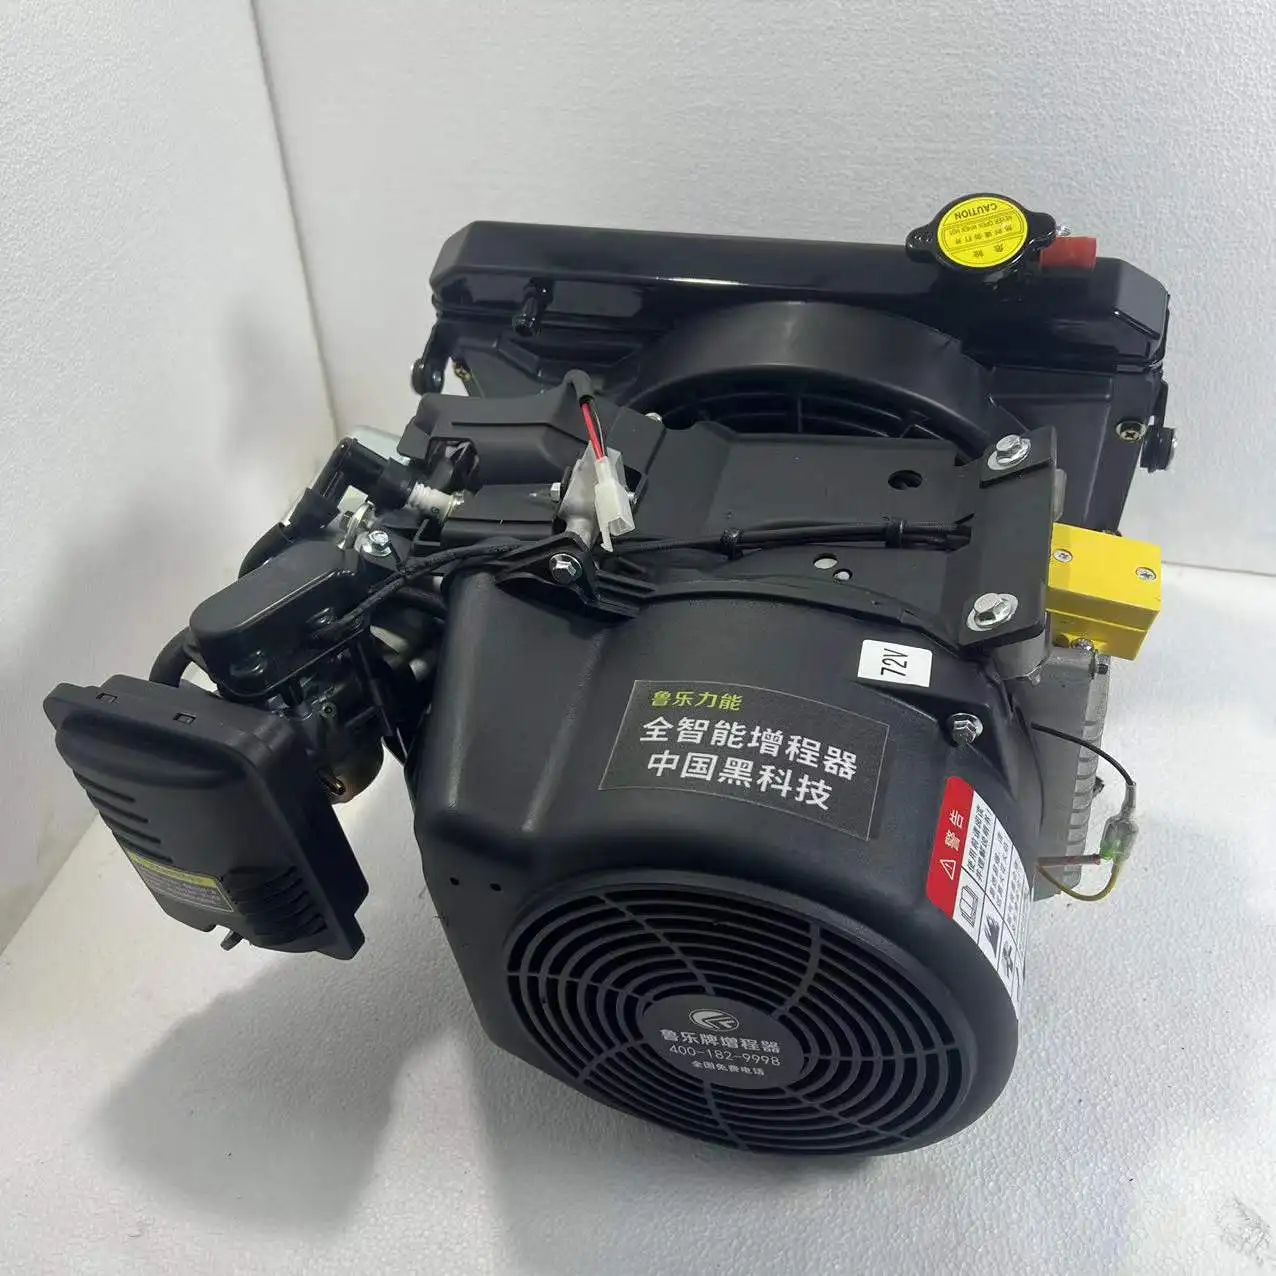 Wholesale Price Low Fuel Consumption And Low Noise 240 Water-cooled Range Extender